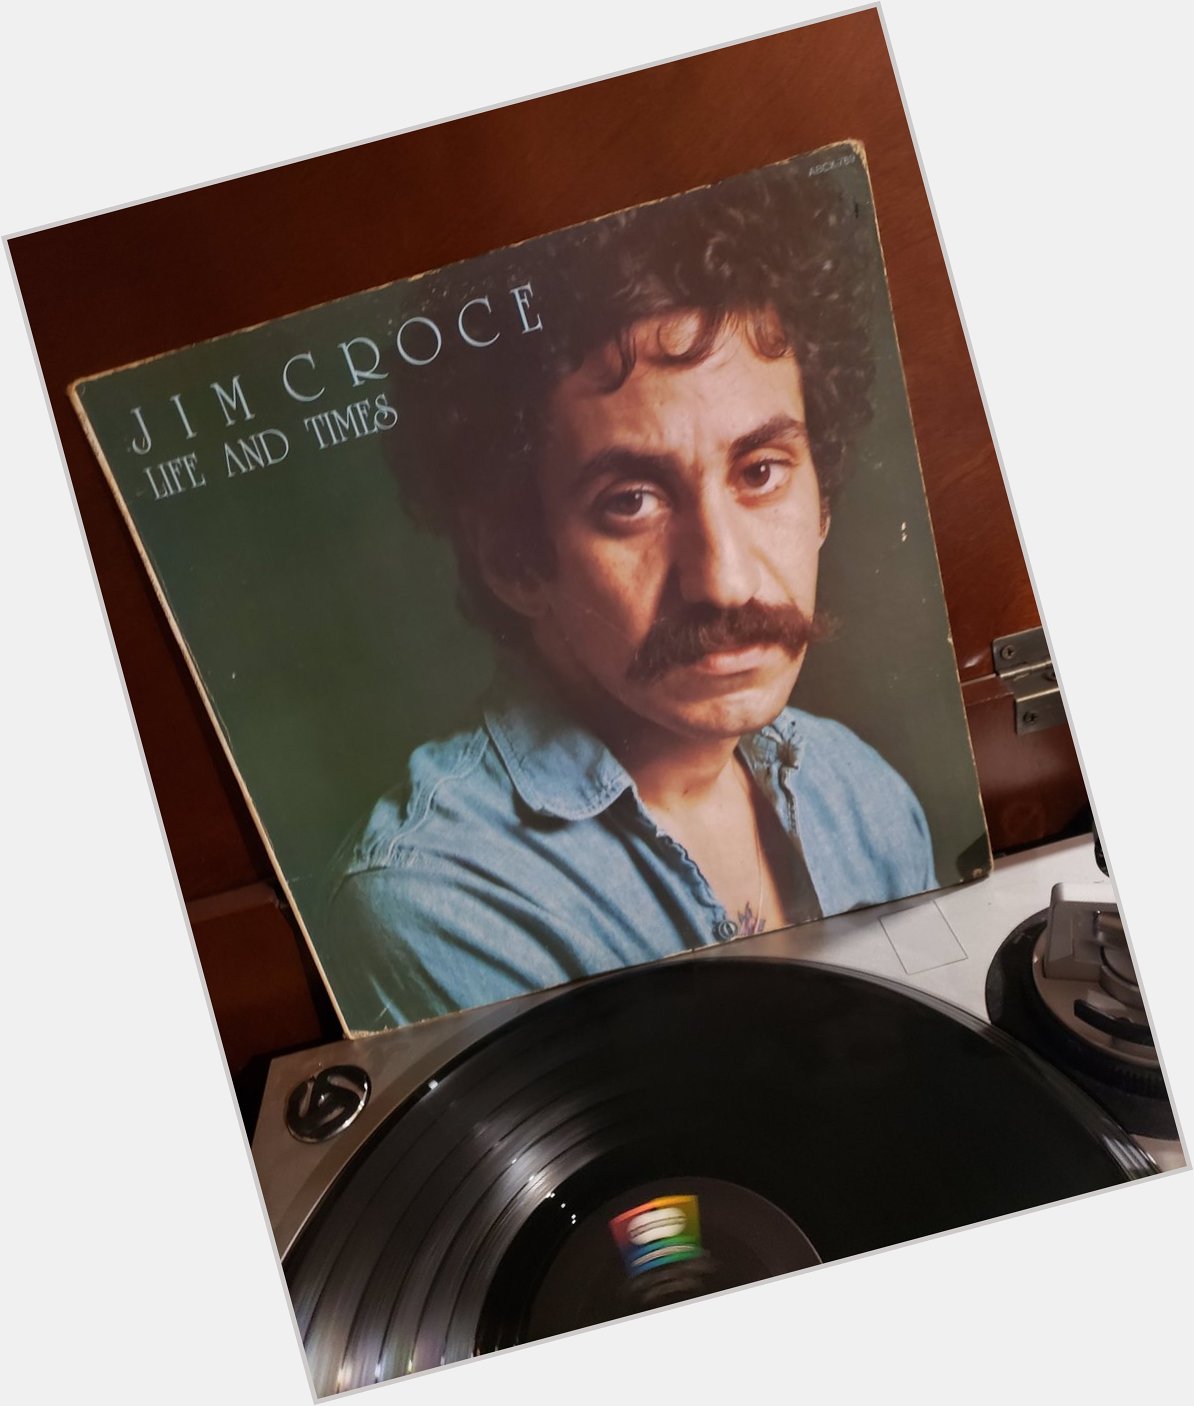 Happy birthday to Jim Croce, Master songwriter. 